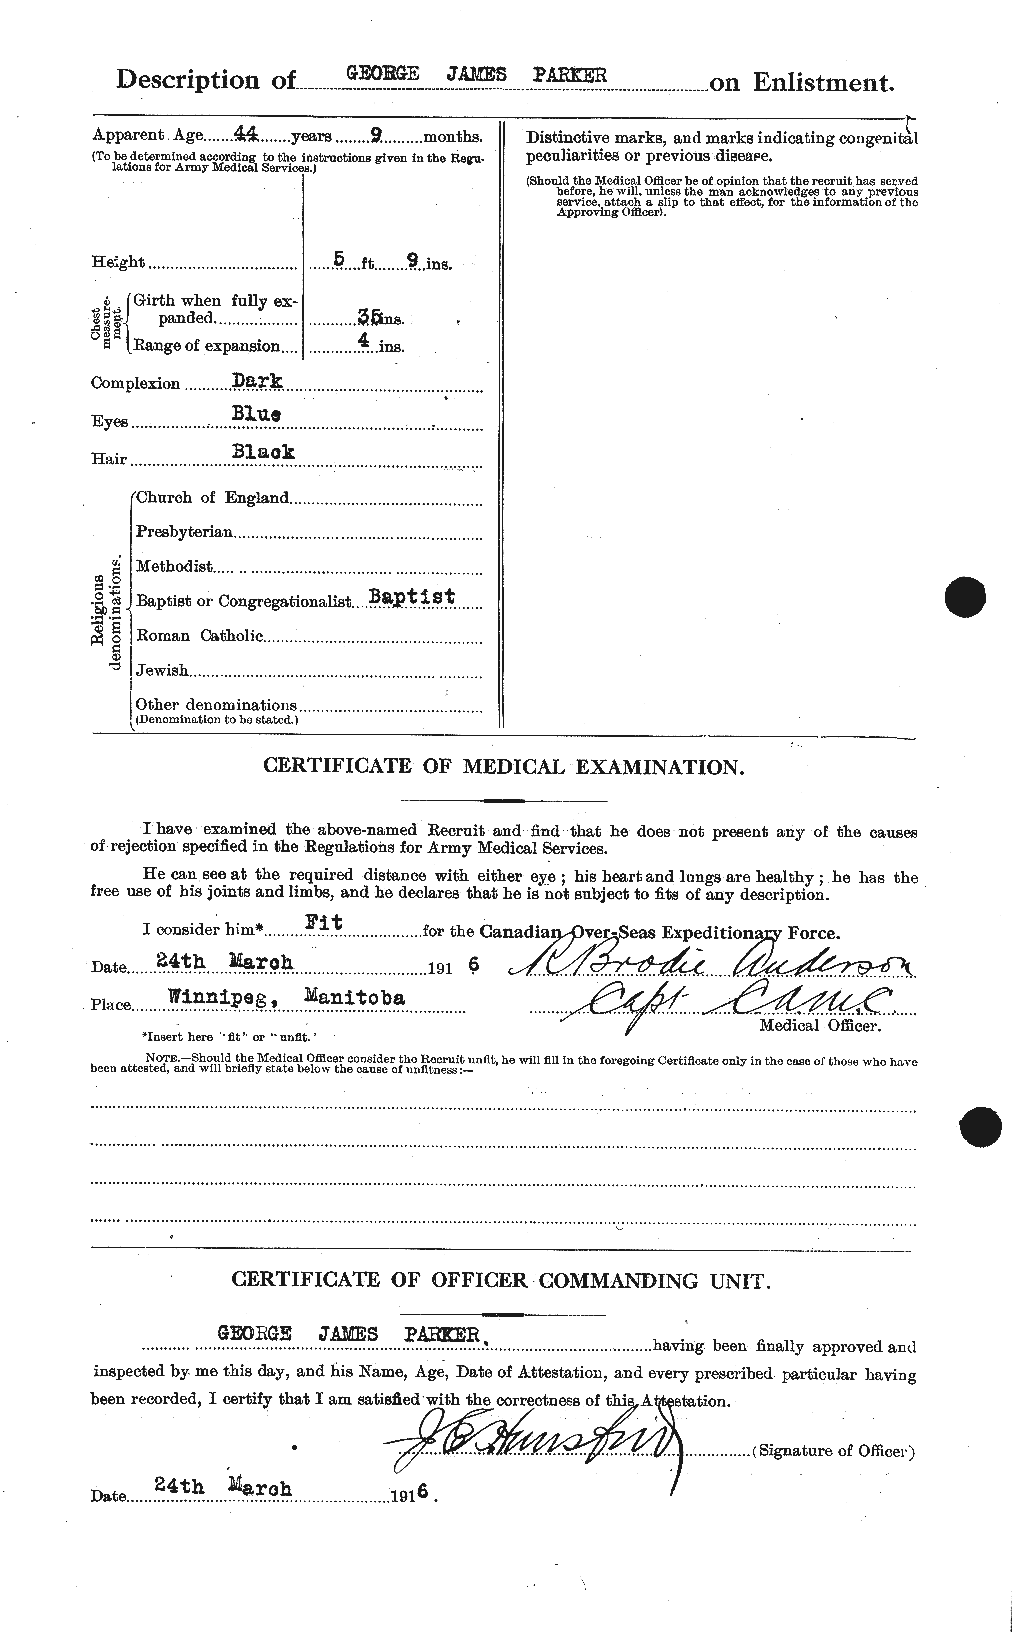 Personnel Records of the First World War - CEF 565268b